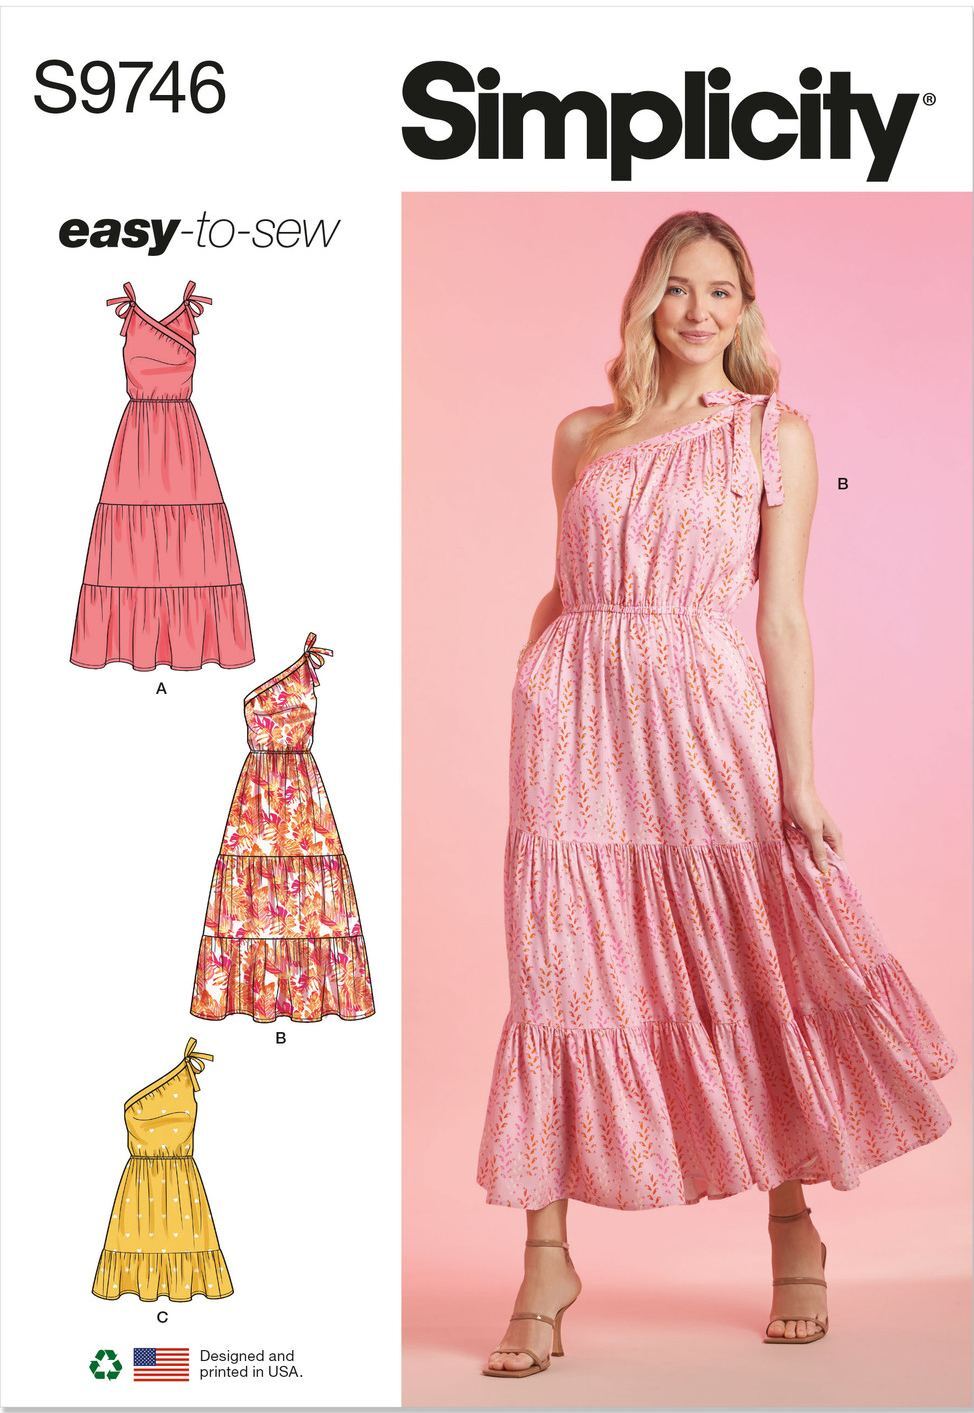 Simplicity Sewing Pattern S9746U5 Misses' Dresses Sizes 16-24